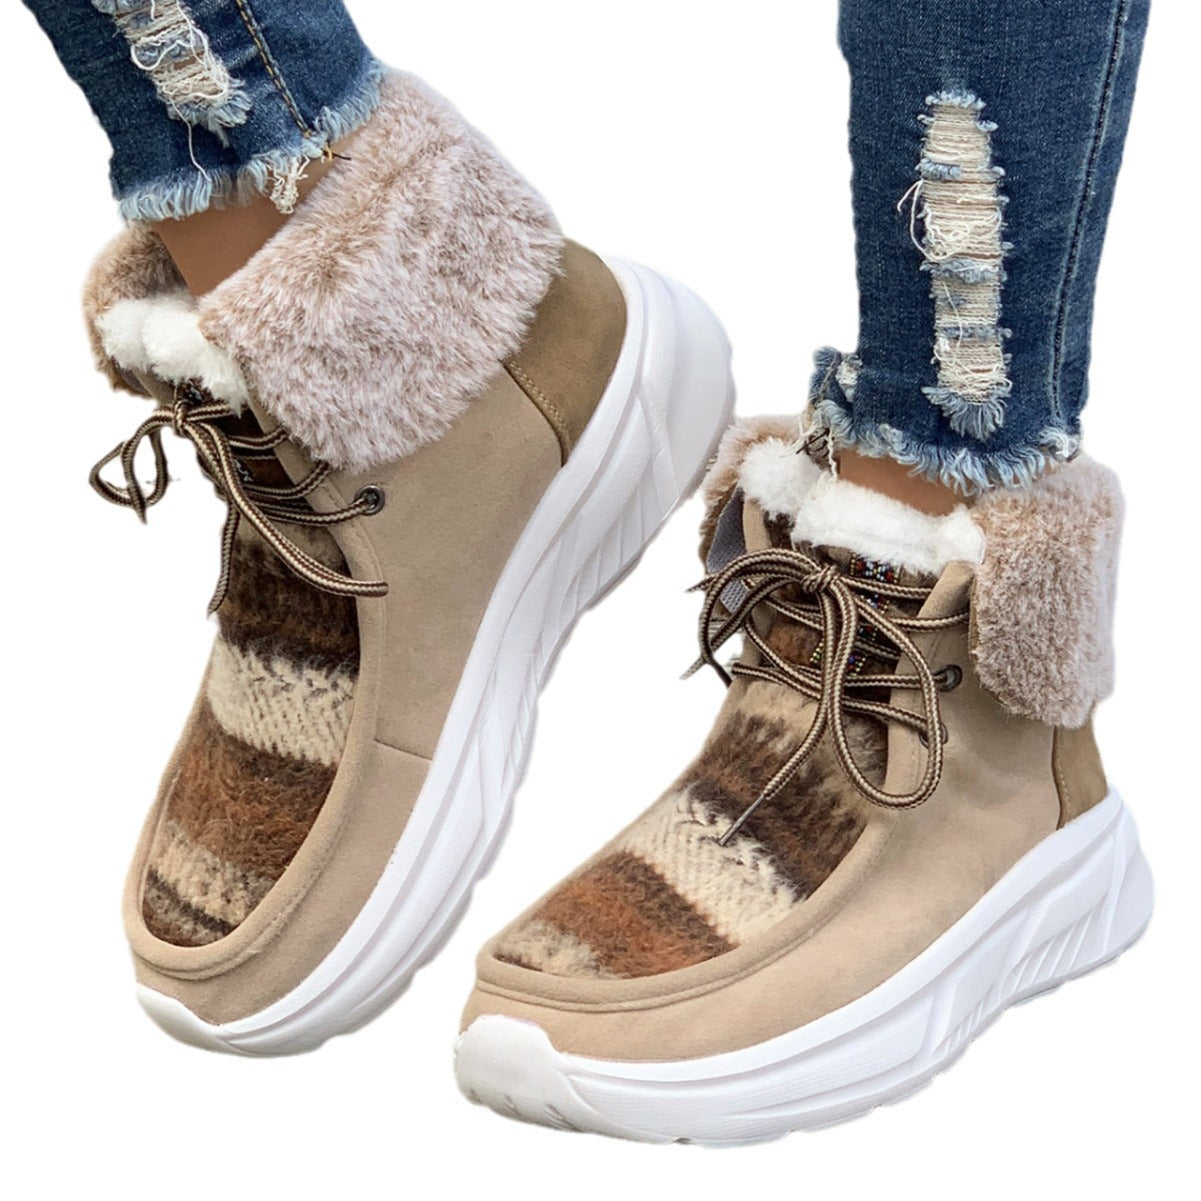 Beige - Fuzzy Thermal Lined Non-slip Lace-up Plush Women's Snow Boots - 3 colors - womens boots at TFC&H Co.